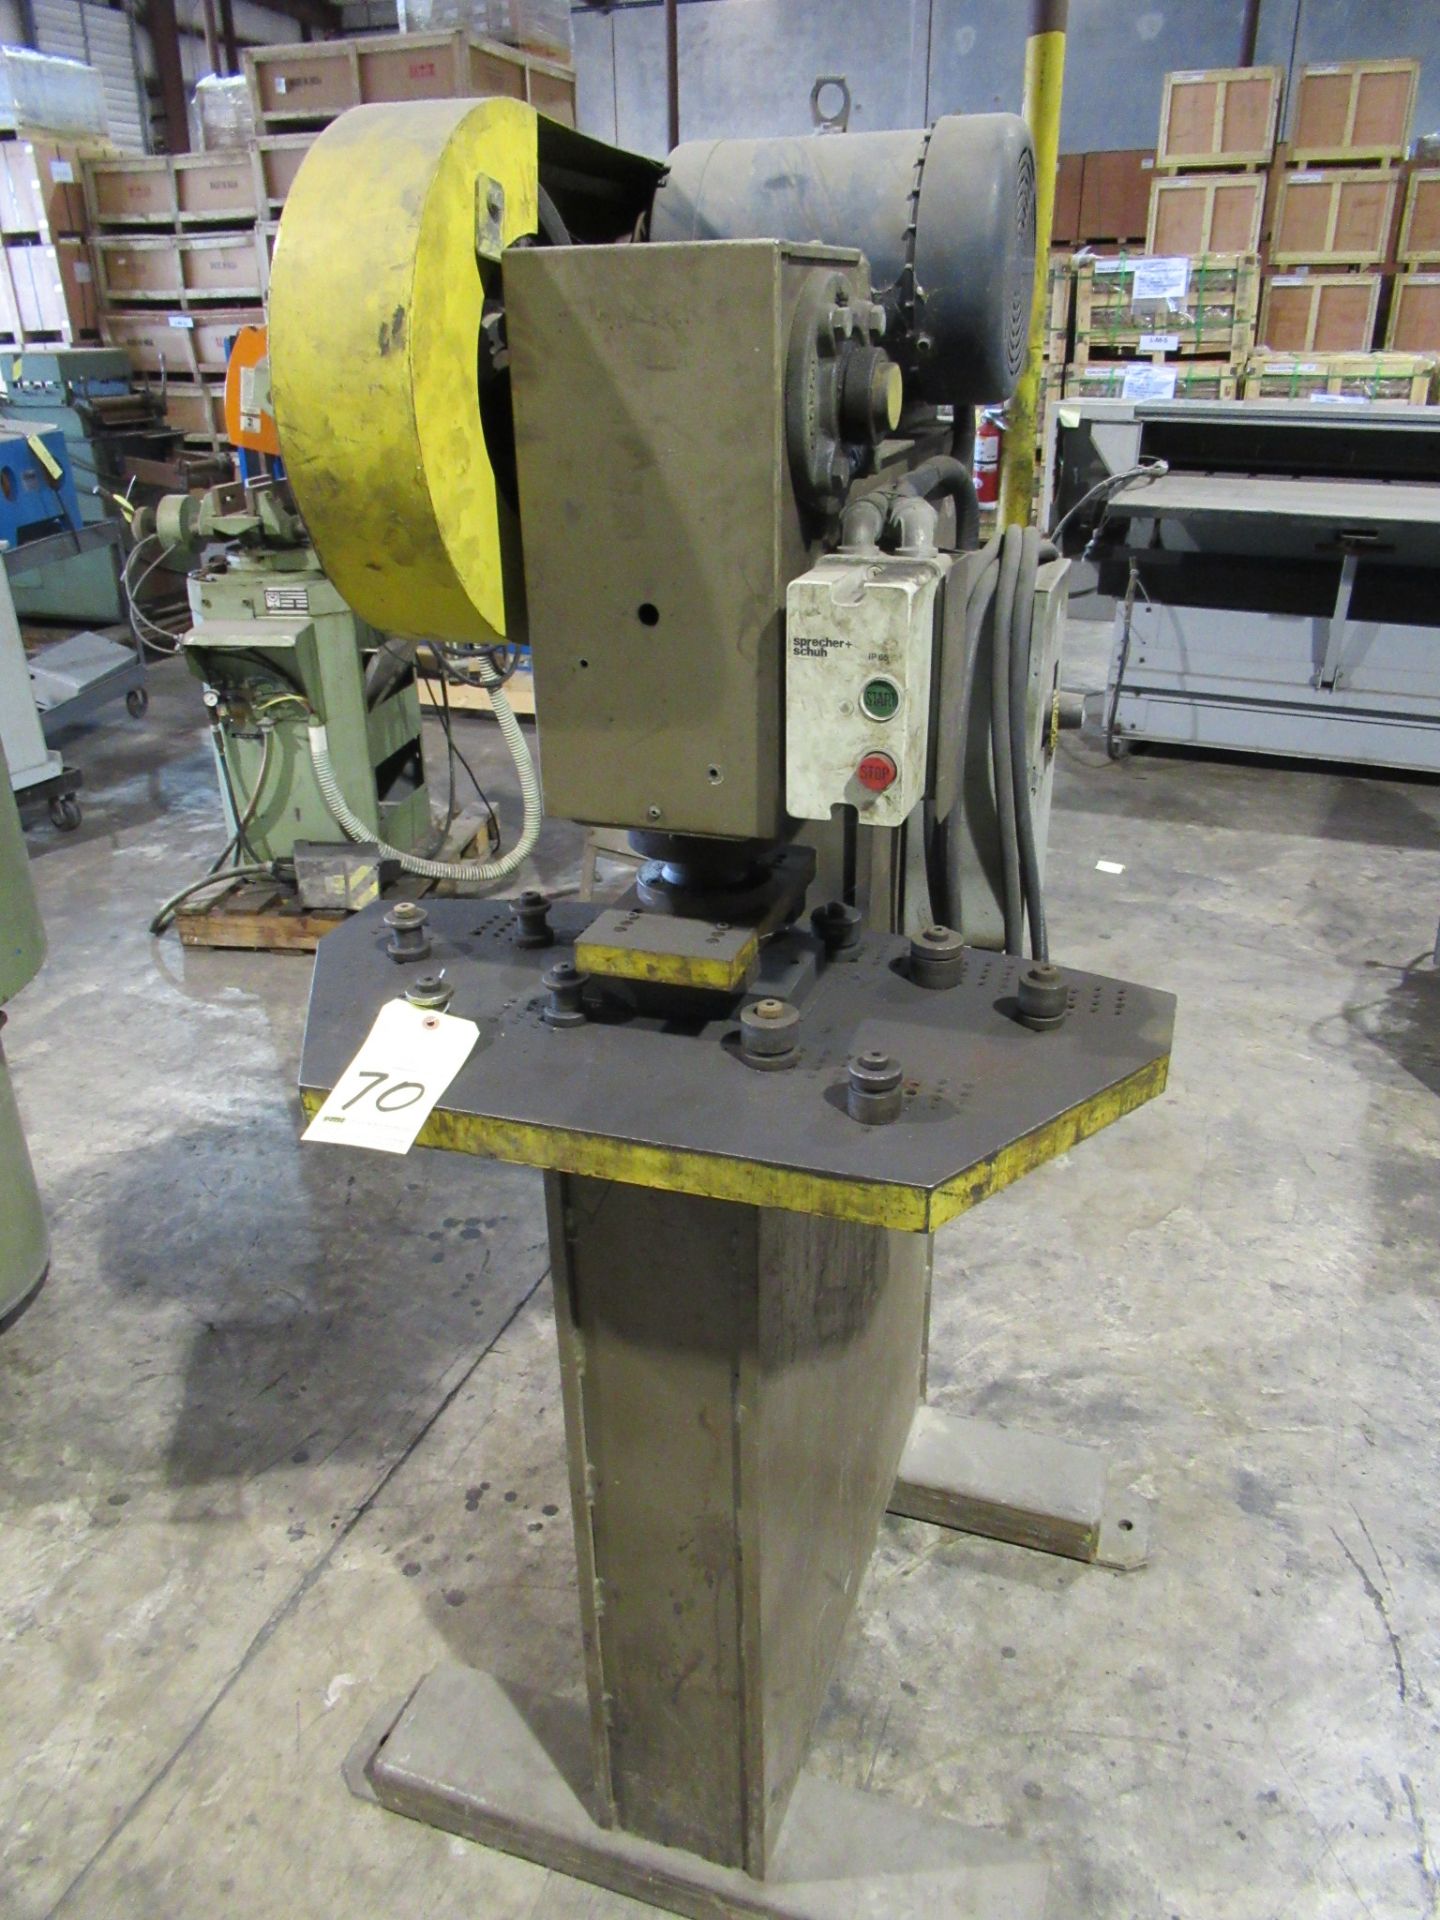 OBI PUNCH PRESS, CUSTOM, Leeson 3 HP motor, S/N N.A. (Location D: Specialized Manufacturing, 8101